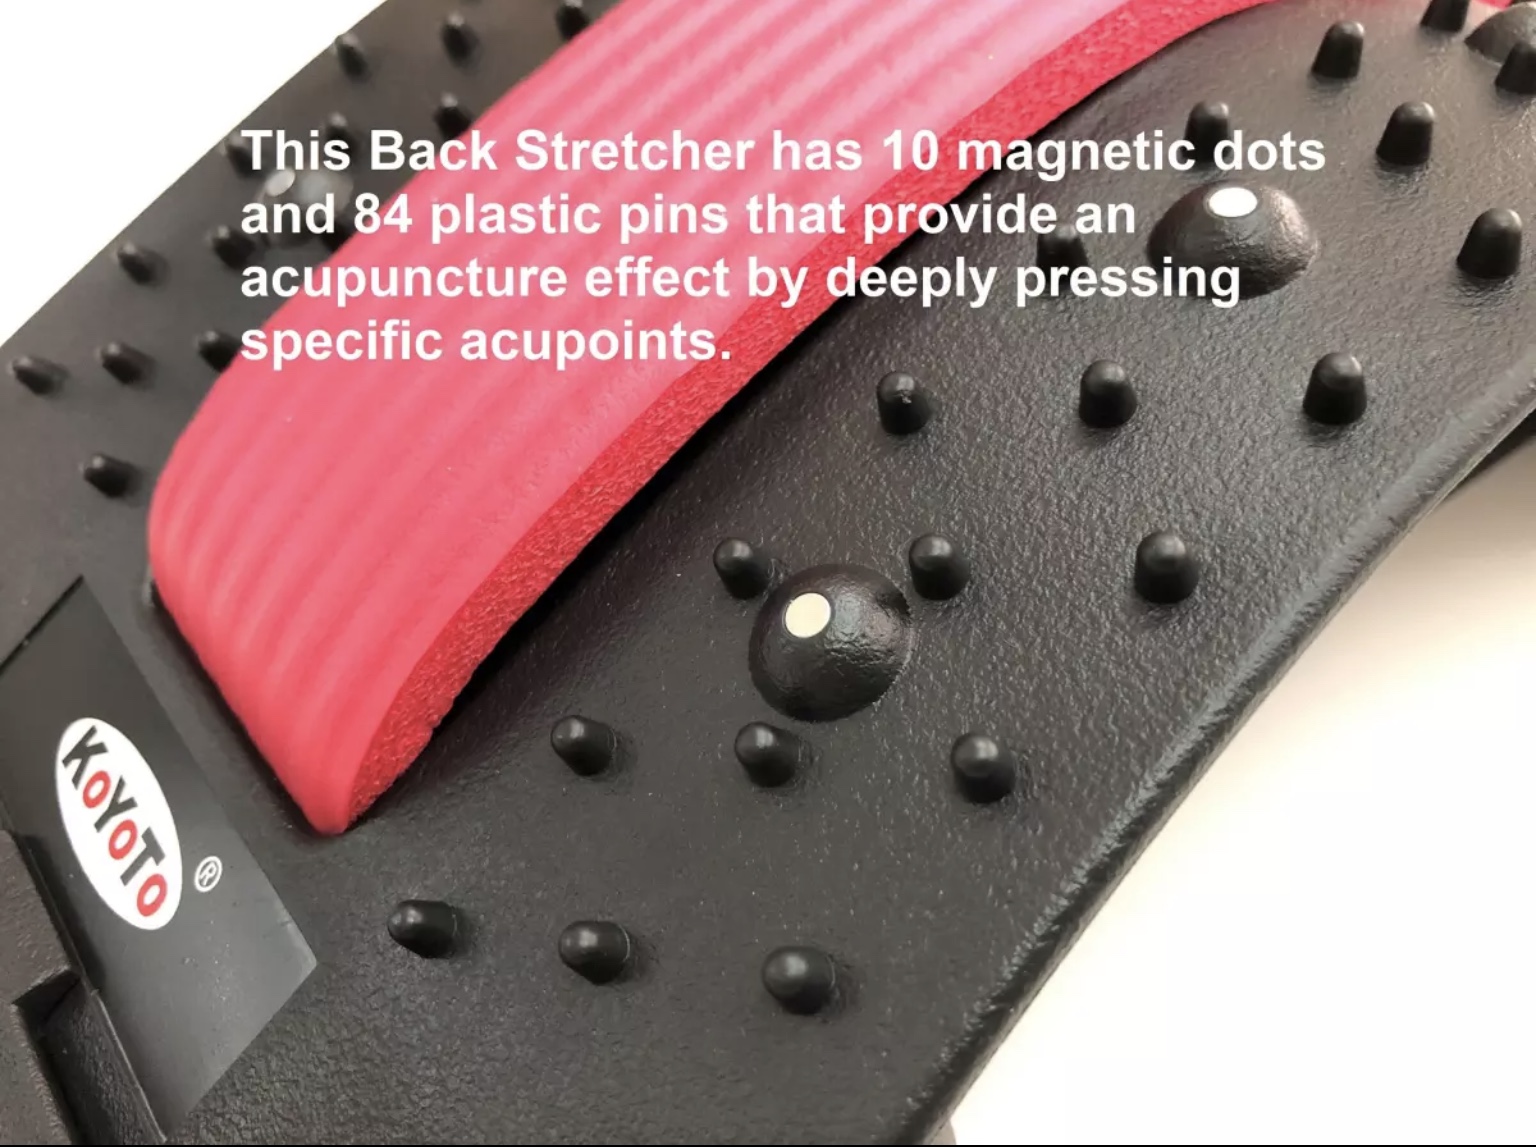 Back Stretcher has 10 magnetic dots and 84 plastic pins that provide an acupuncture effect by deeply pressing specific acupoints